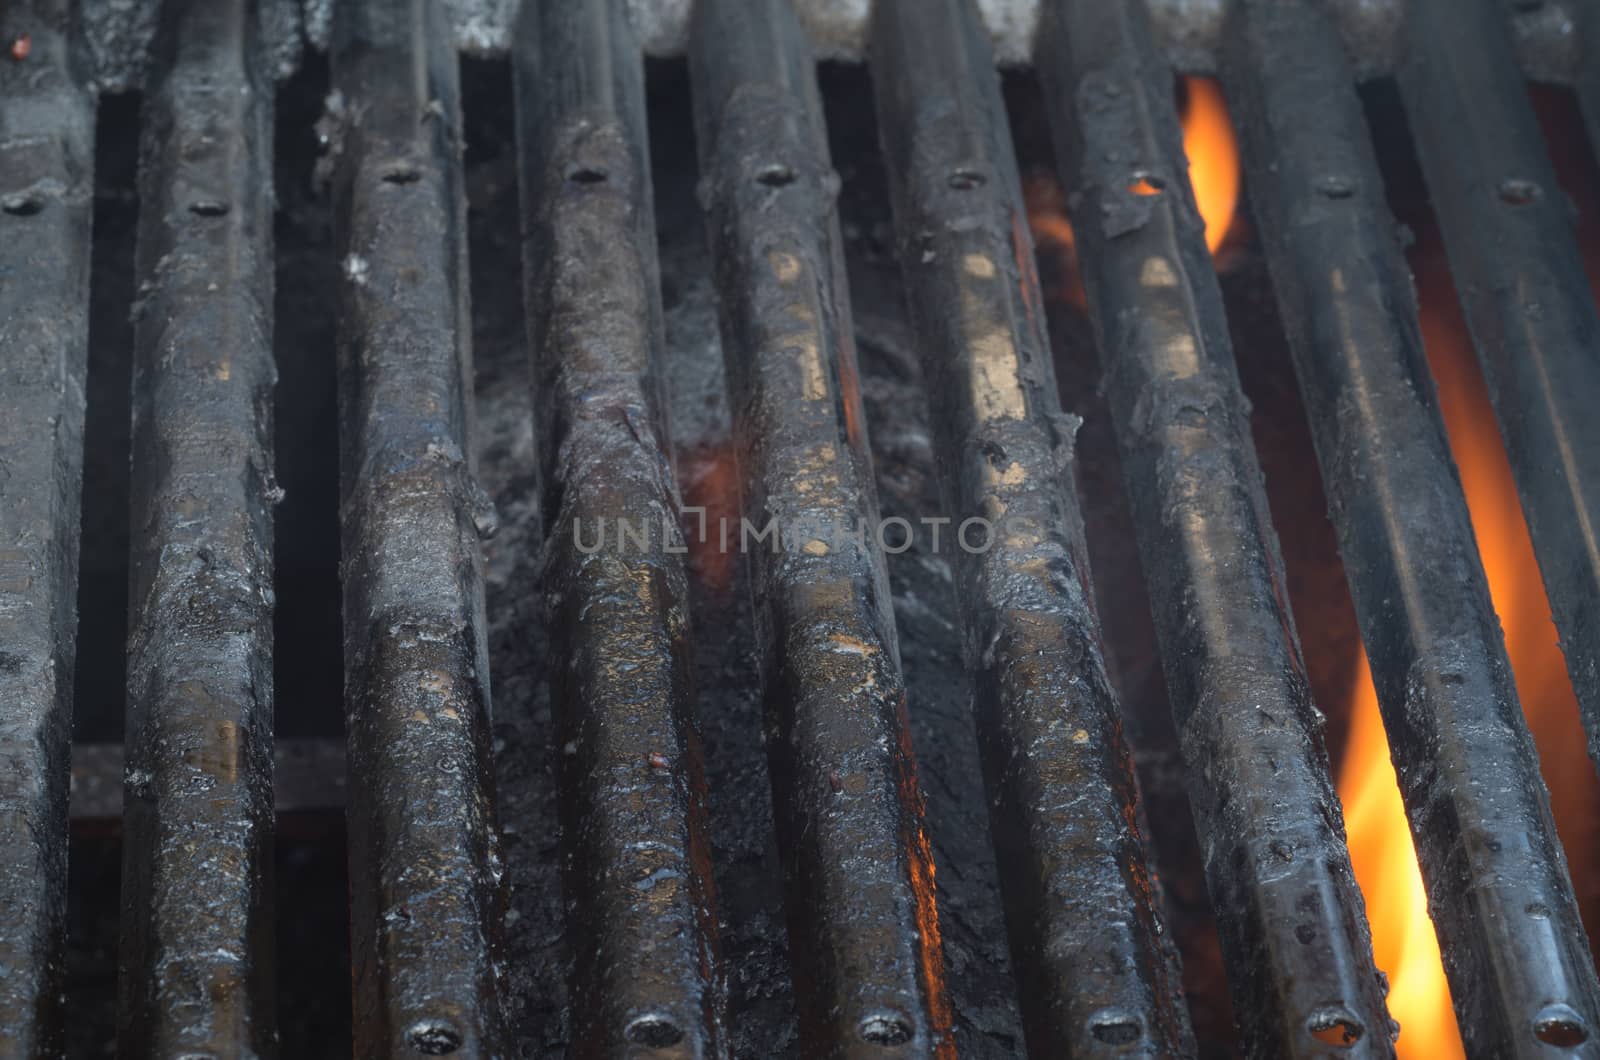 Dirty barbecue grills and flames